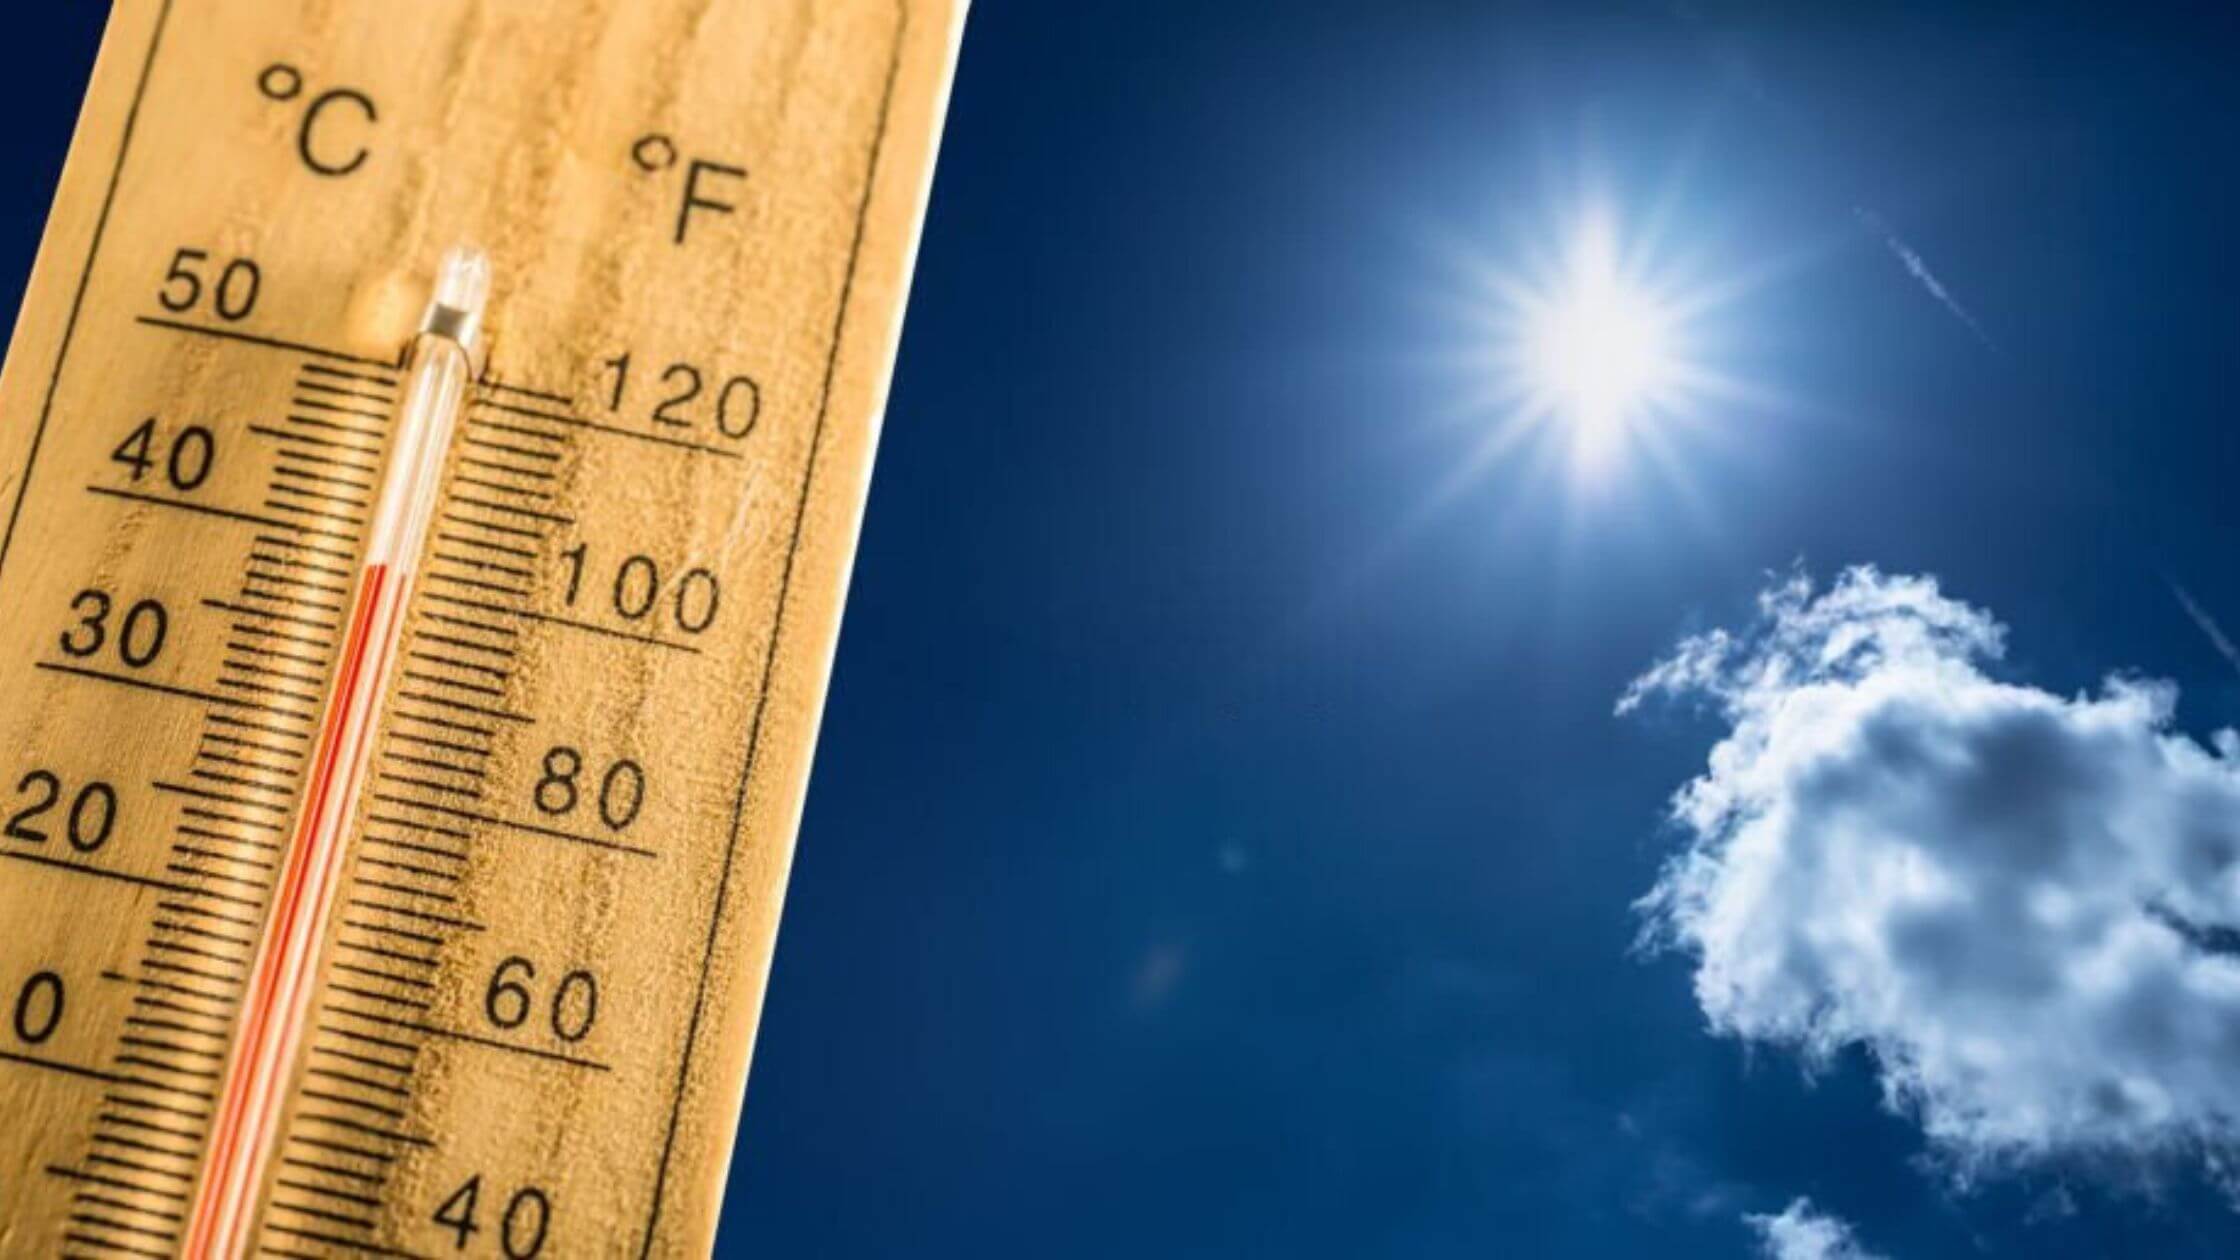 This Is The First Time That Scientist Have Formally Named A Heat Wave